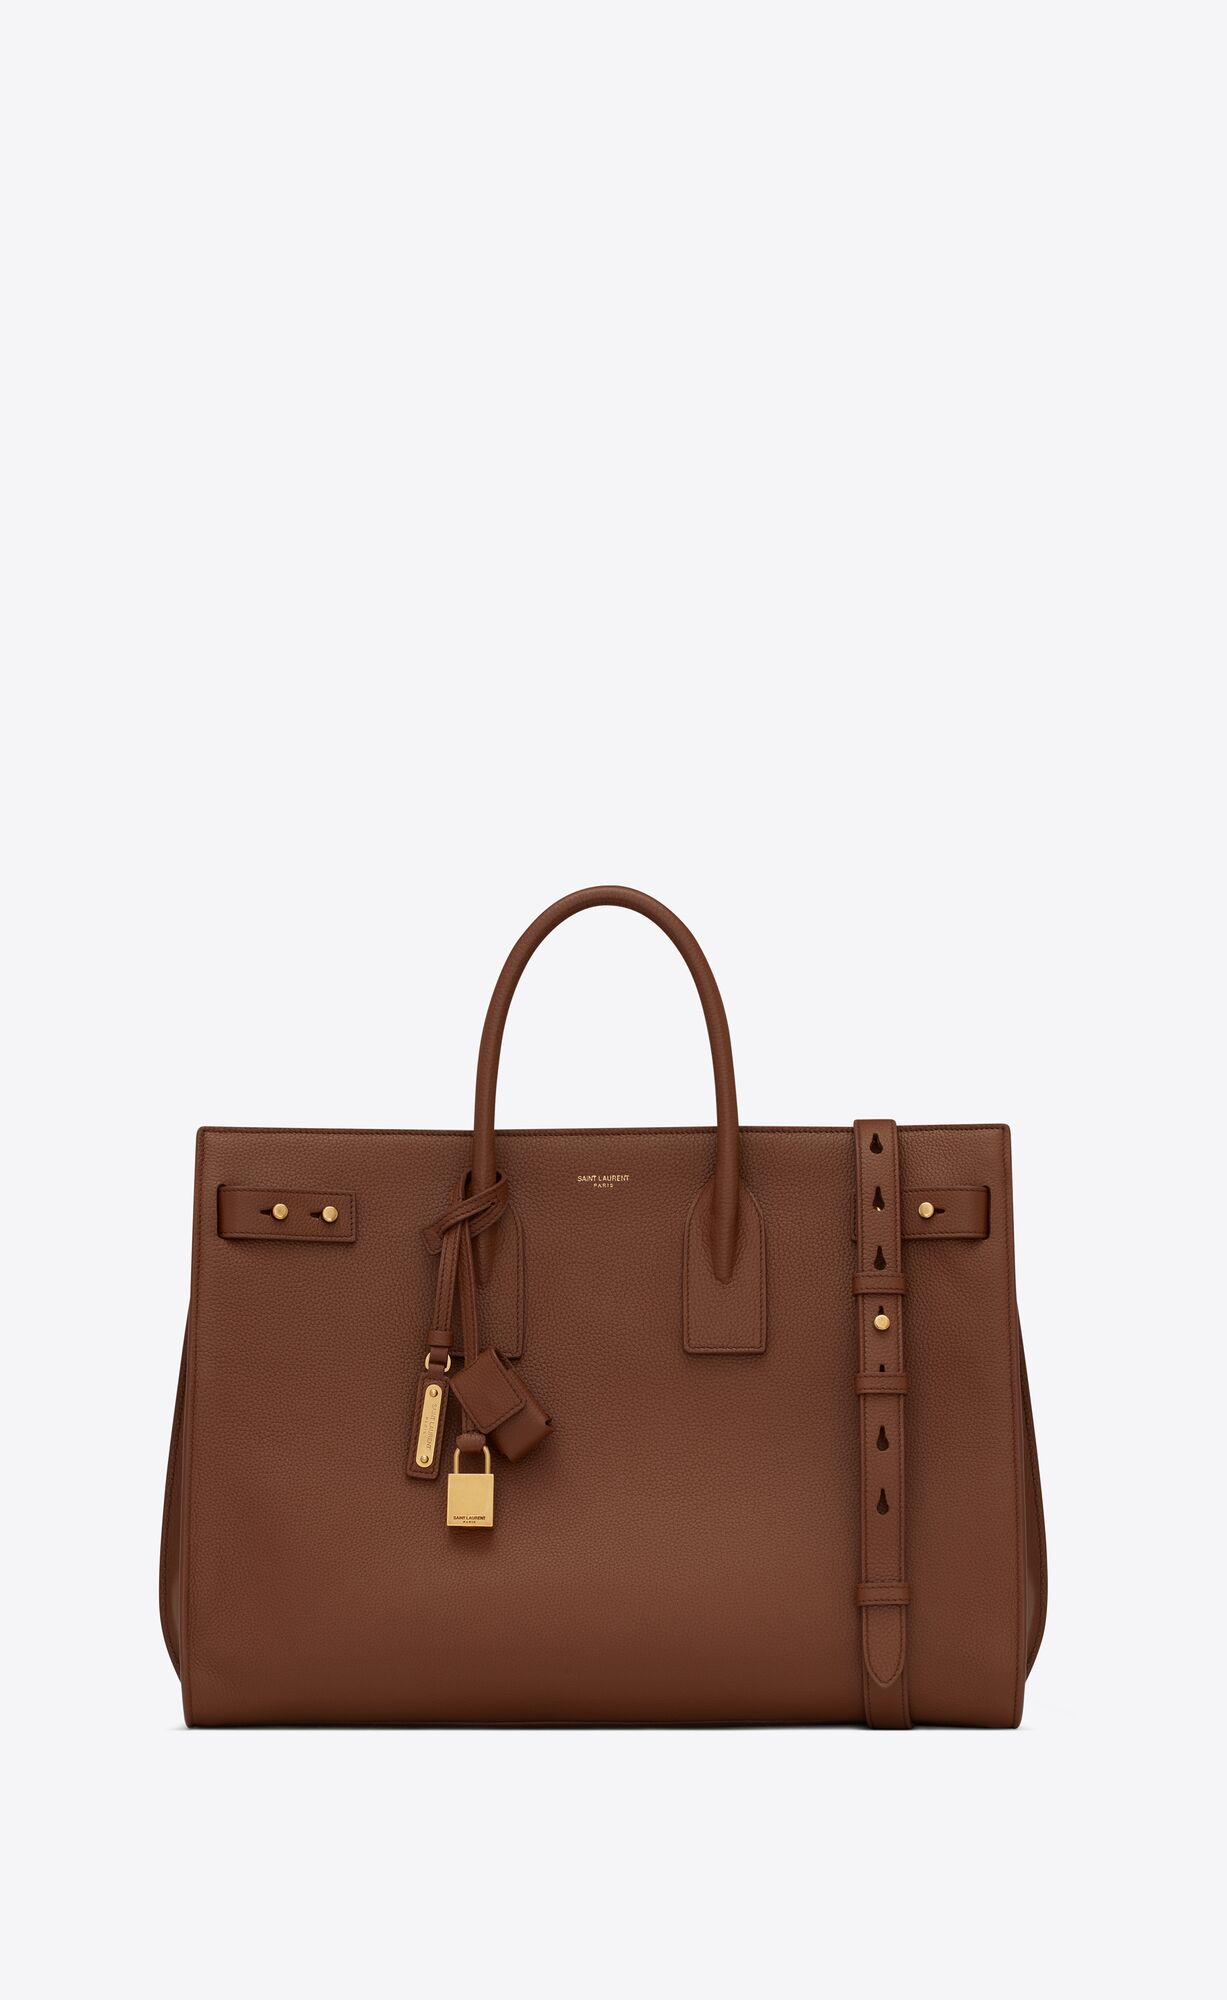 Saint Laurent Sac De Jour Thin Large Bag In Grained Leather – Toasted Brown – 631526DTI0W2126